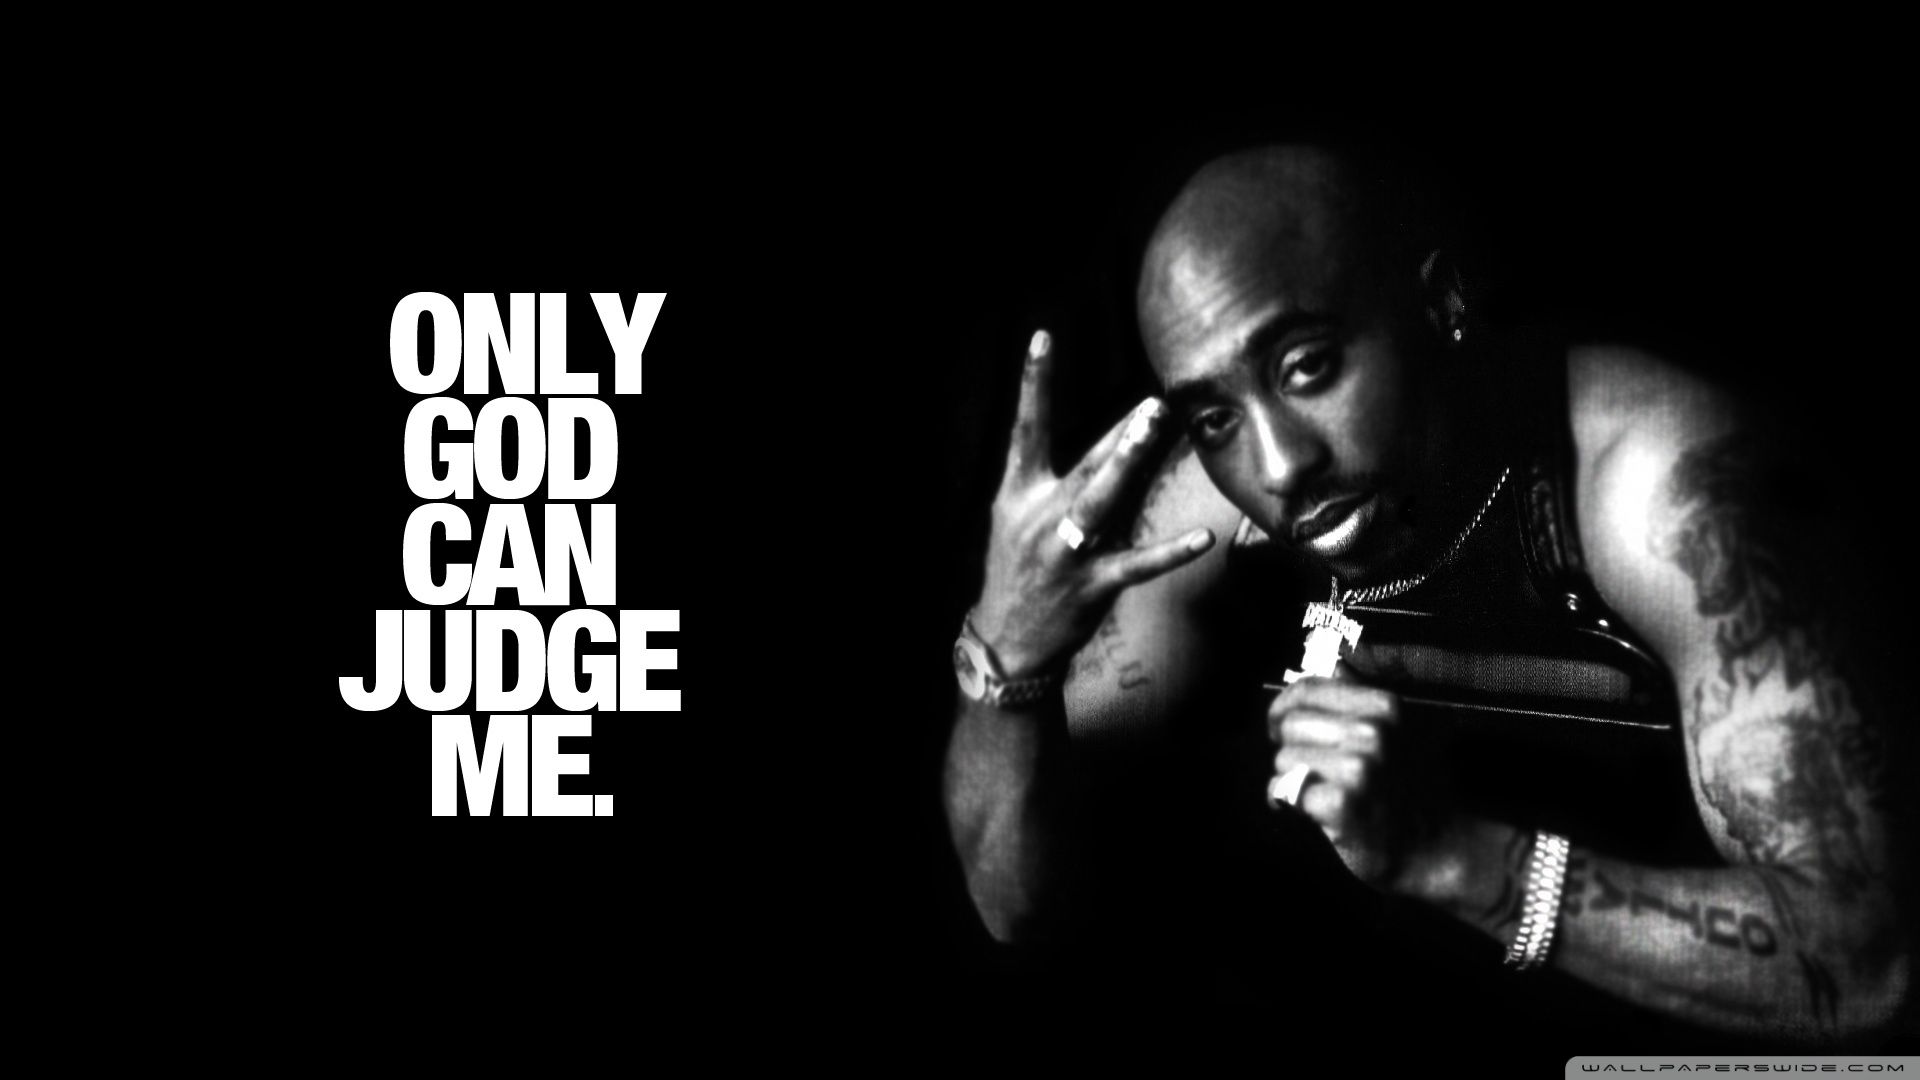 2Pac Wallpaper Free 2Pac Background